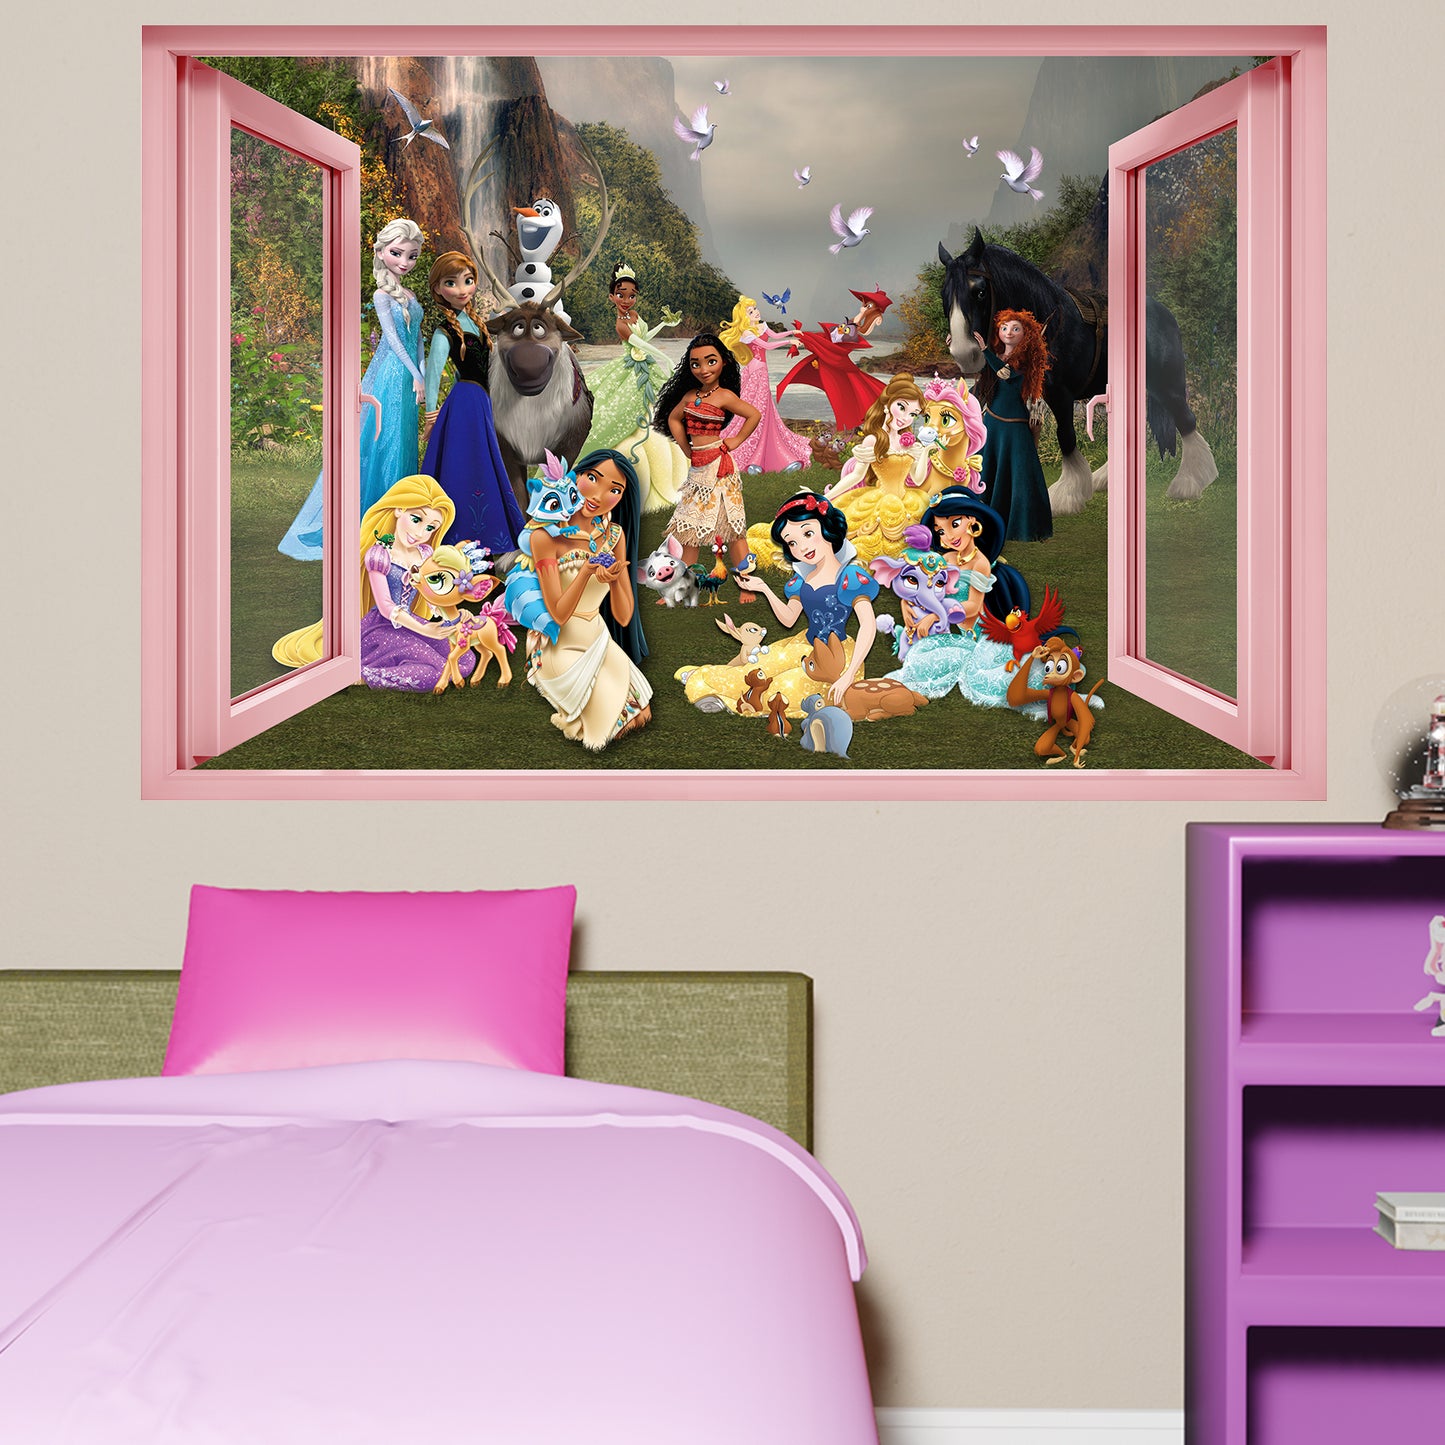 Princess Characters Pets and Fairies Wall Sticker Art Poster Decal Mural  Nursery Girls Bedroom Decor 1086